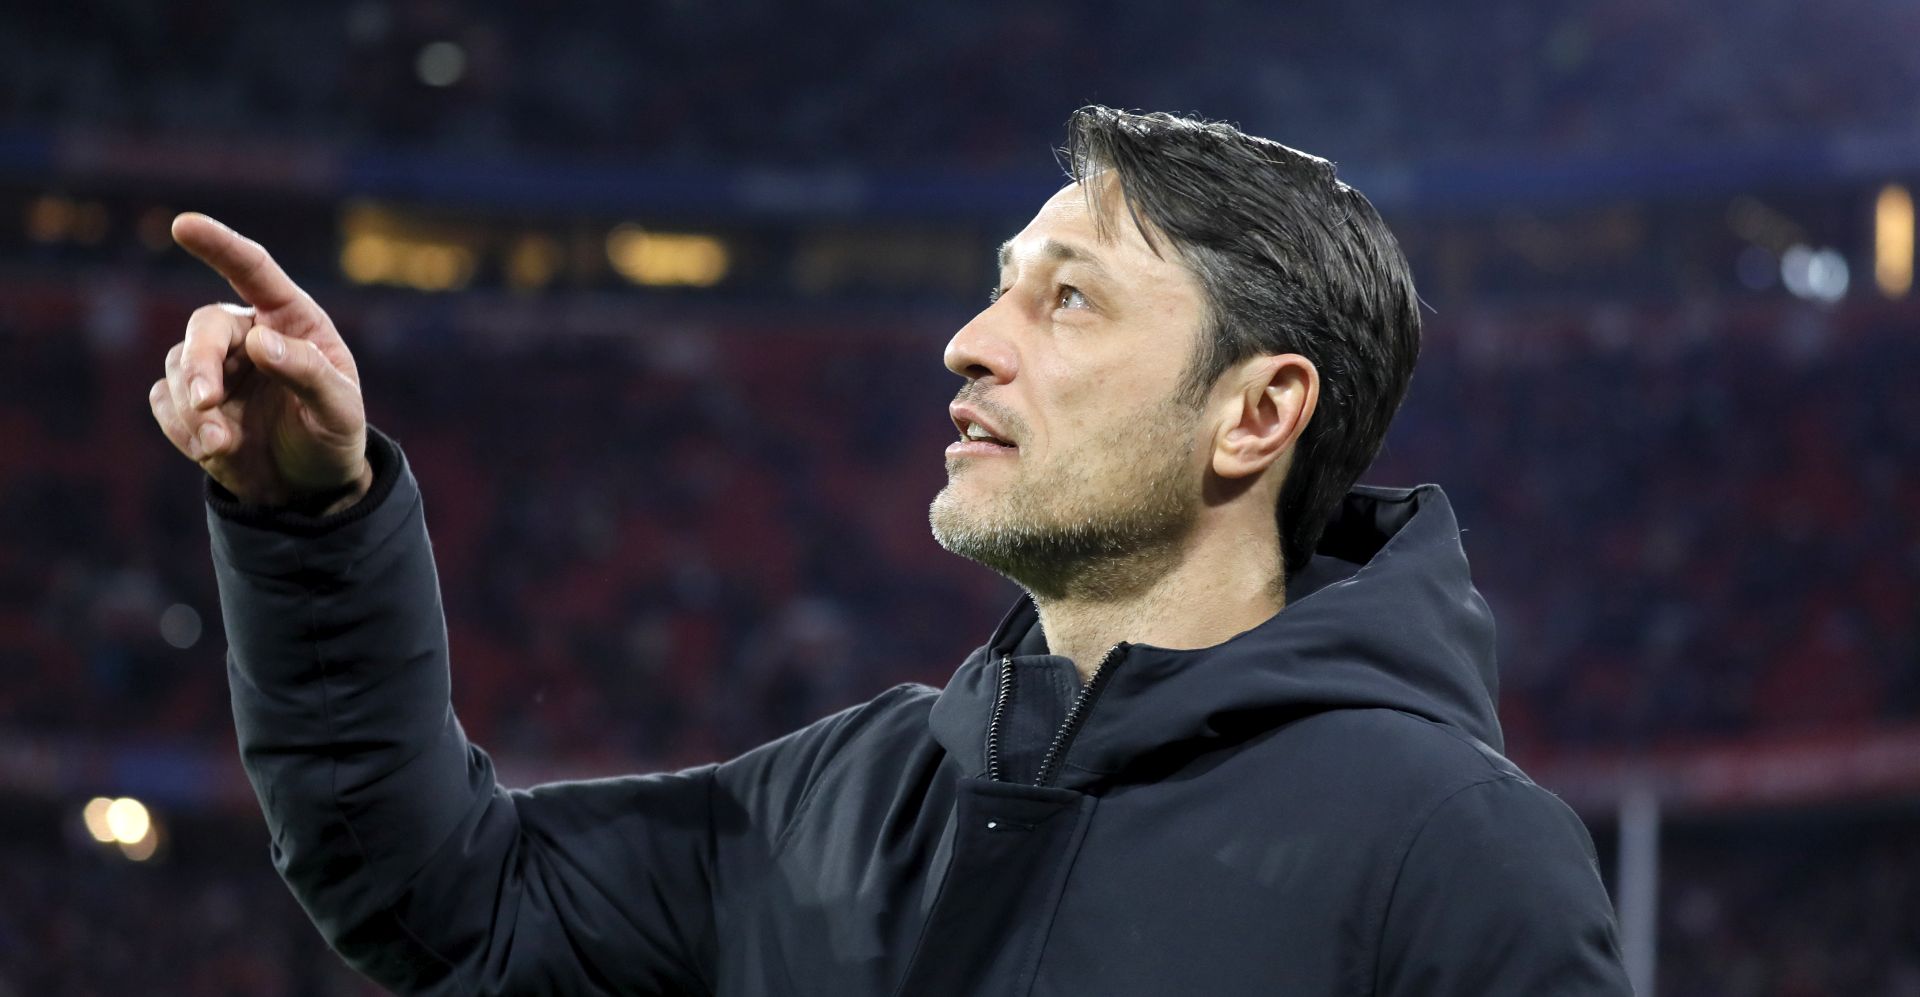 epa07356365 Bayern's head coach Niko Kovac reacts before the German Bundesliga soccer match between FC Bayern Munich and FC Schalke 04 in Munich, Germany, 09 February 2019.  EPA/RONALD WITTEK CONDITIONS - ATTENTION: The DFL regulations prohibit any use of photographs as image sequences and/or quasi-video.